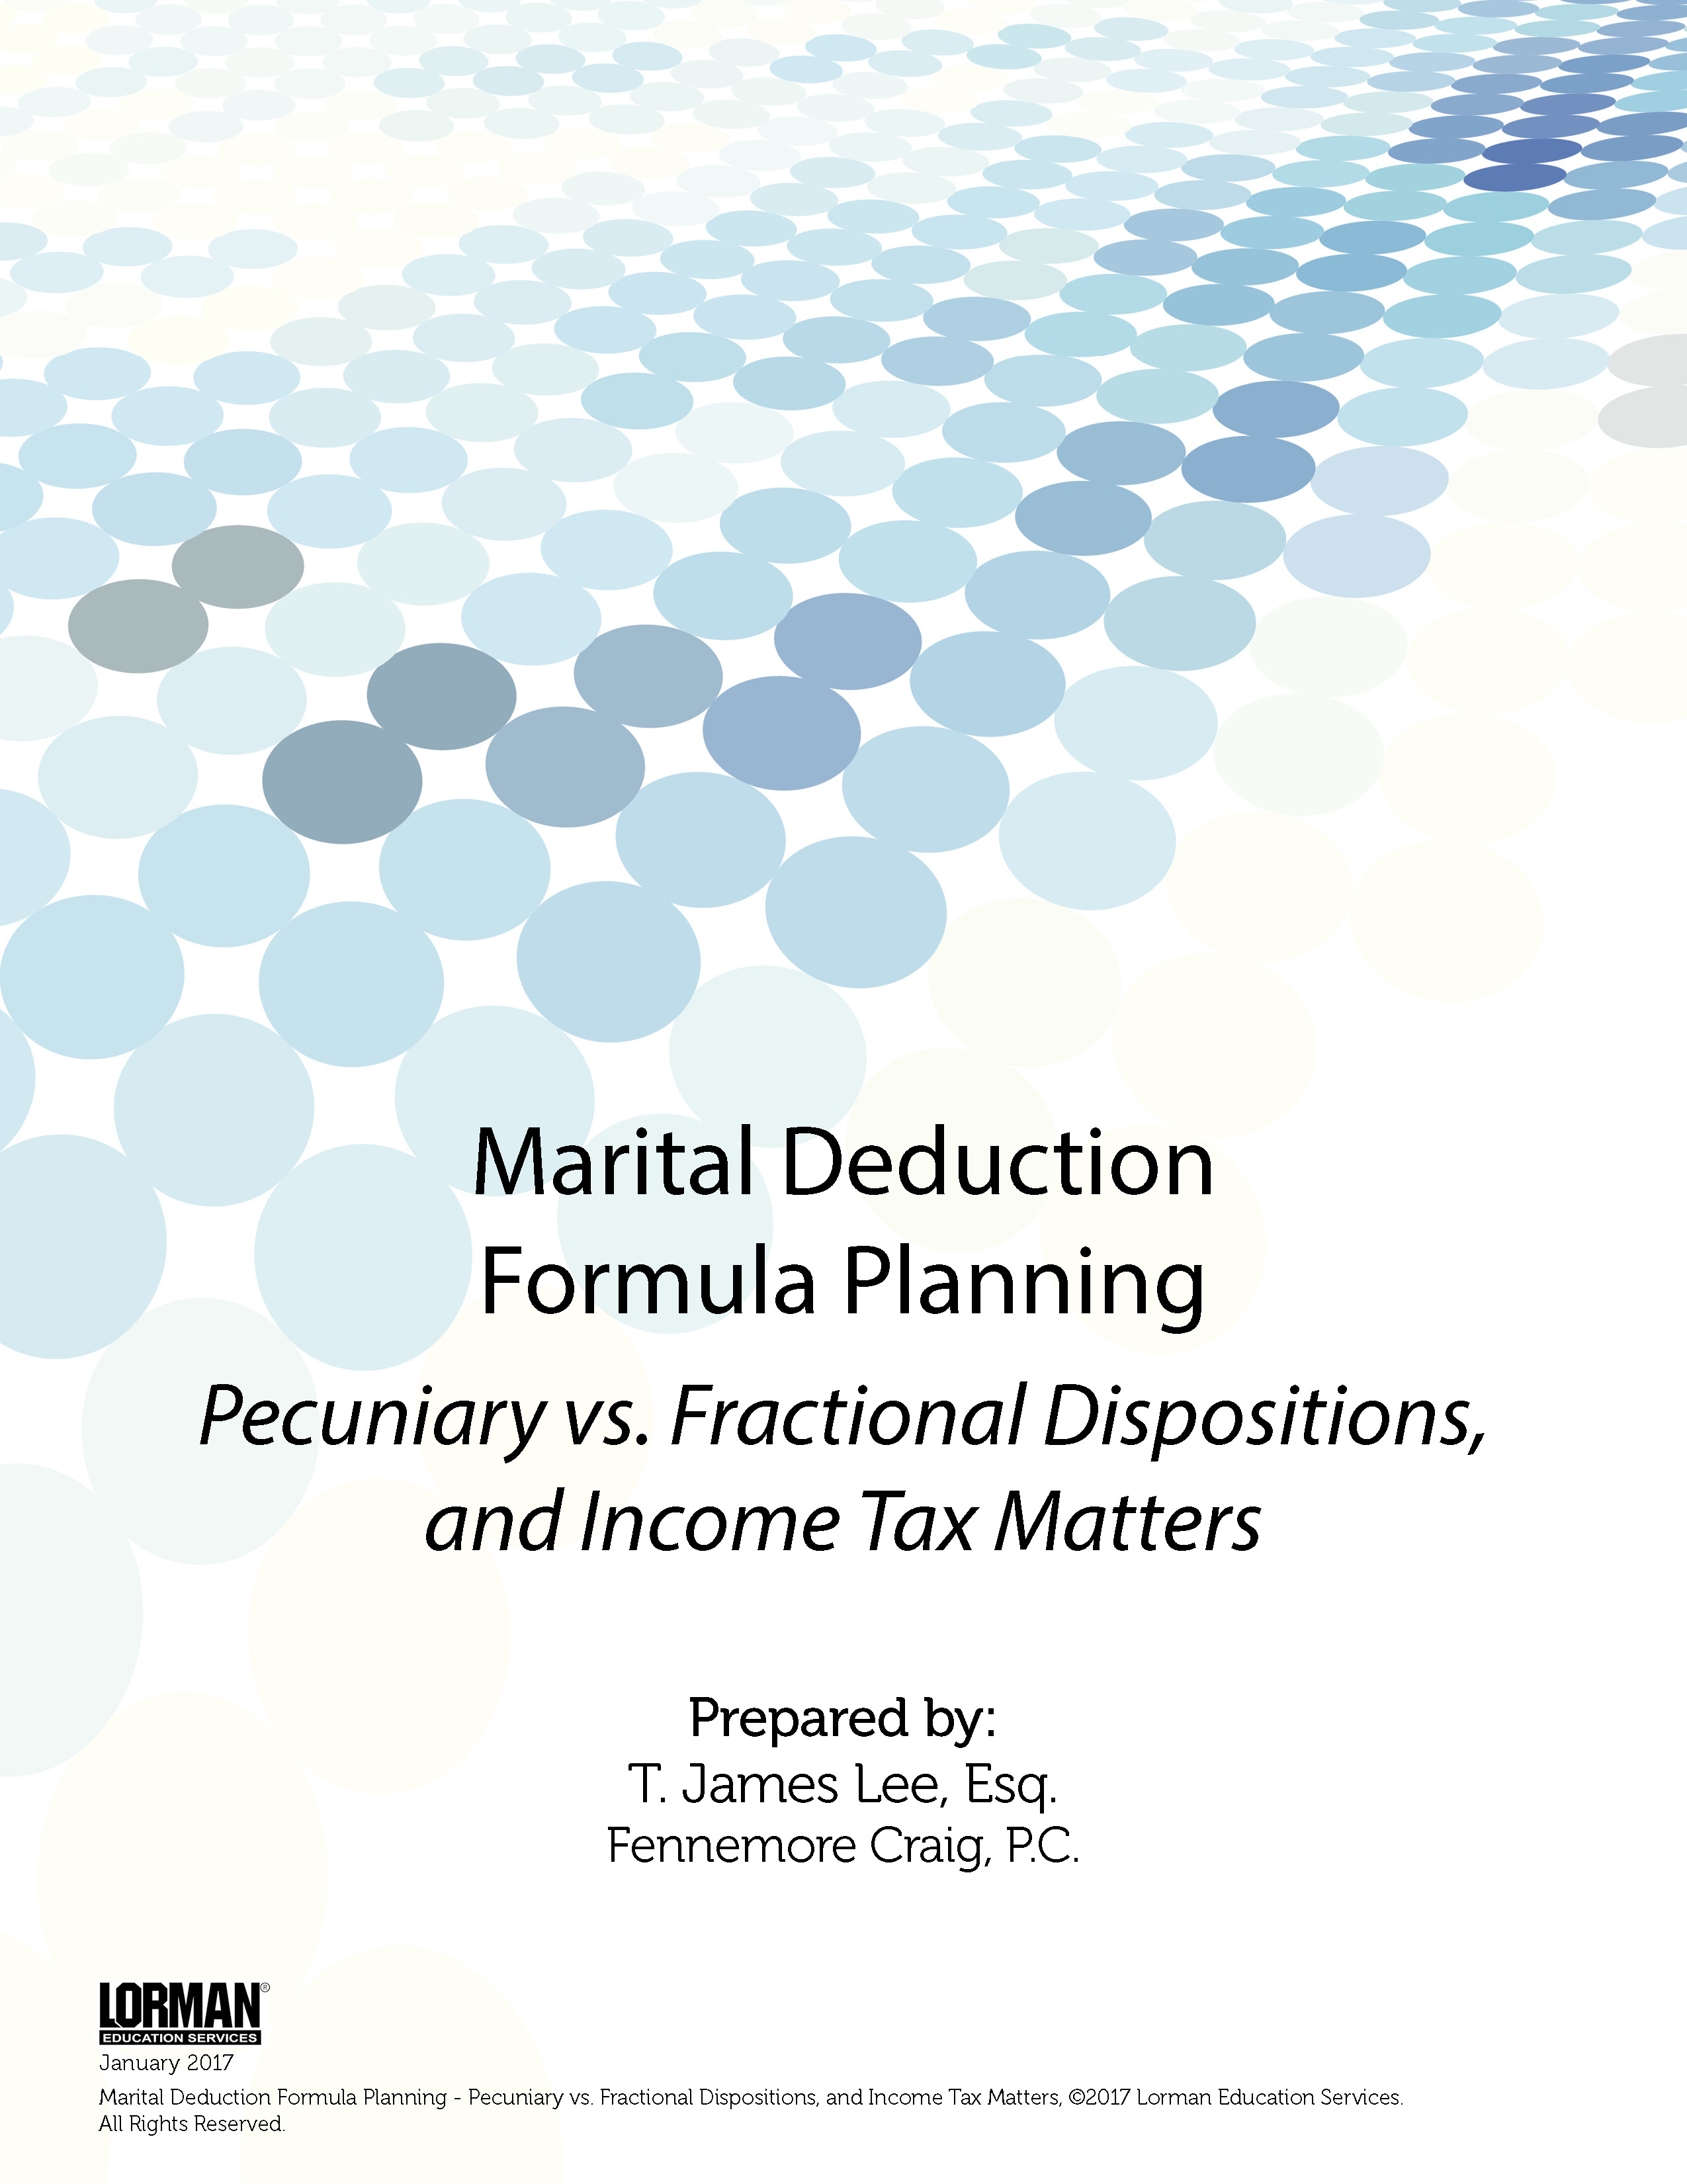 Marital Deduction Formula Planning - Pecuniary vs. Fractional Dispositions, and Income Tax Matters